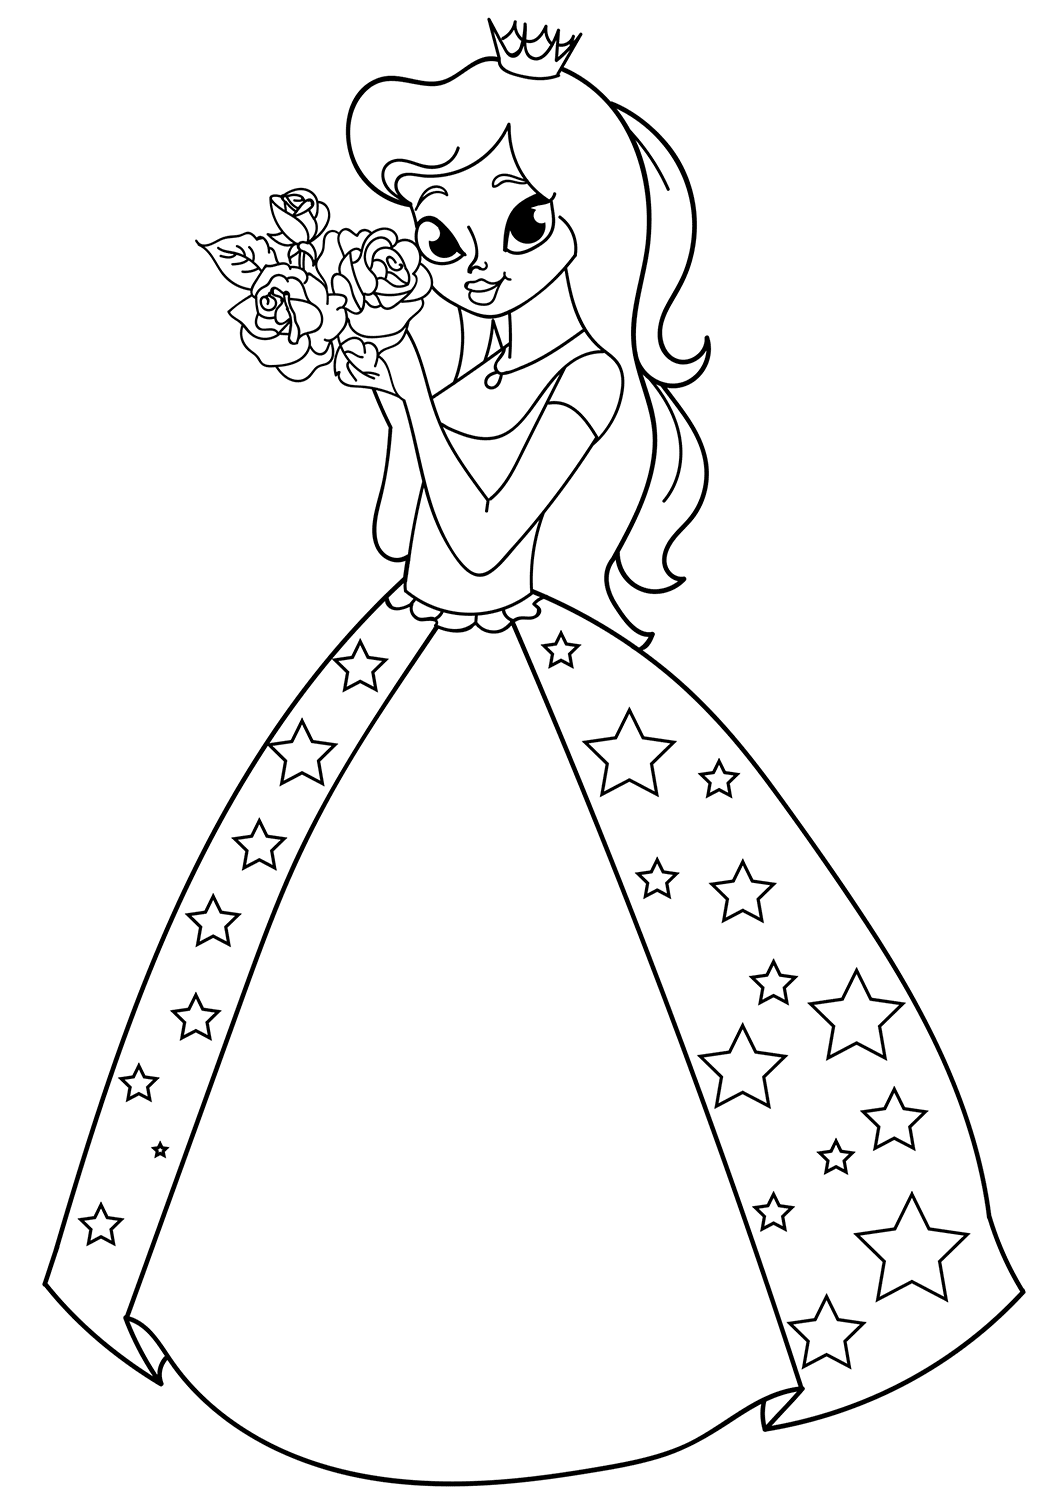 Princess With Roses Coloring Page